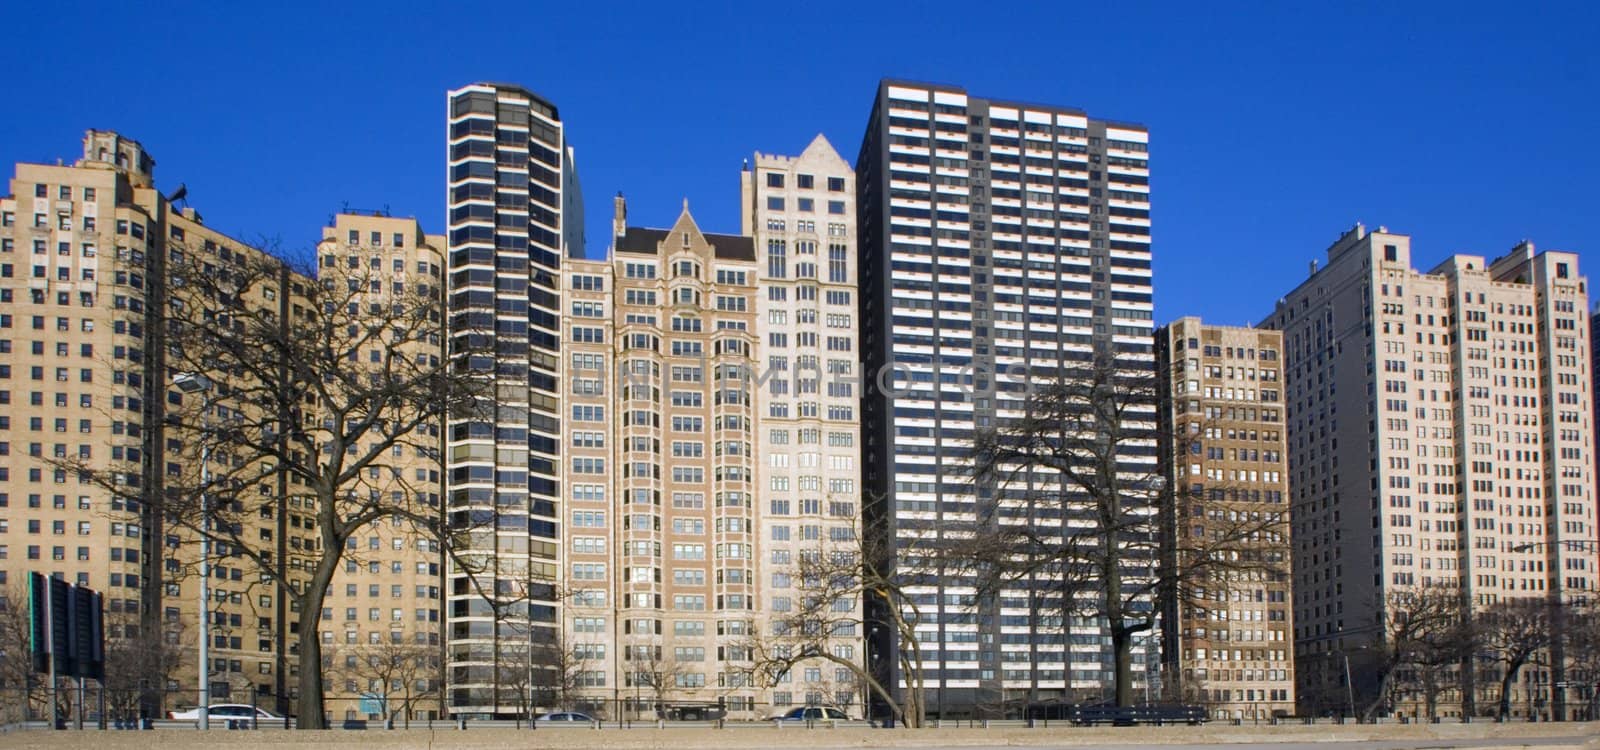 Buildings by Lake Shore Drive in Chicago, IL.